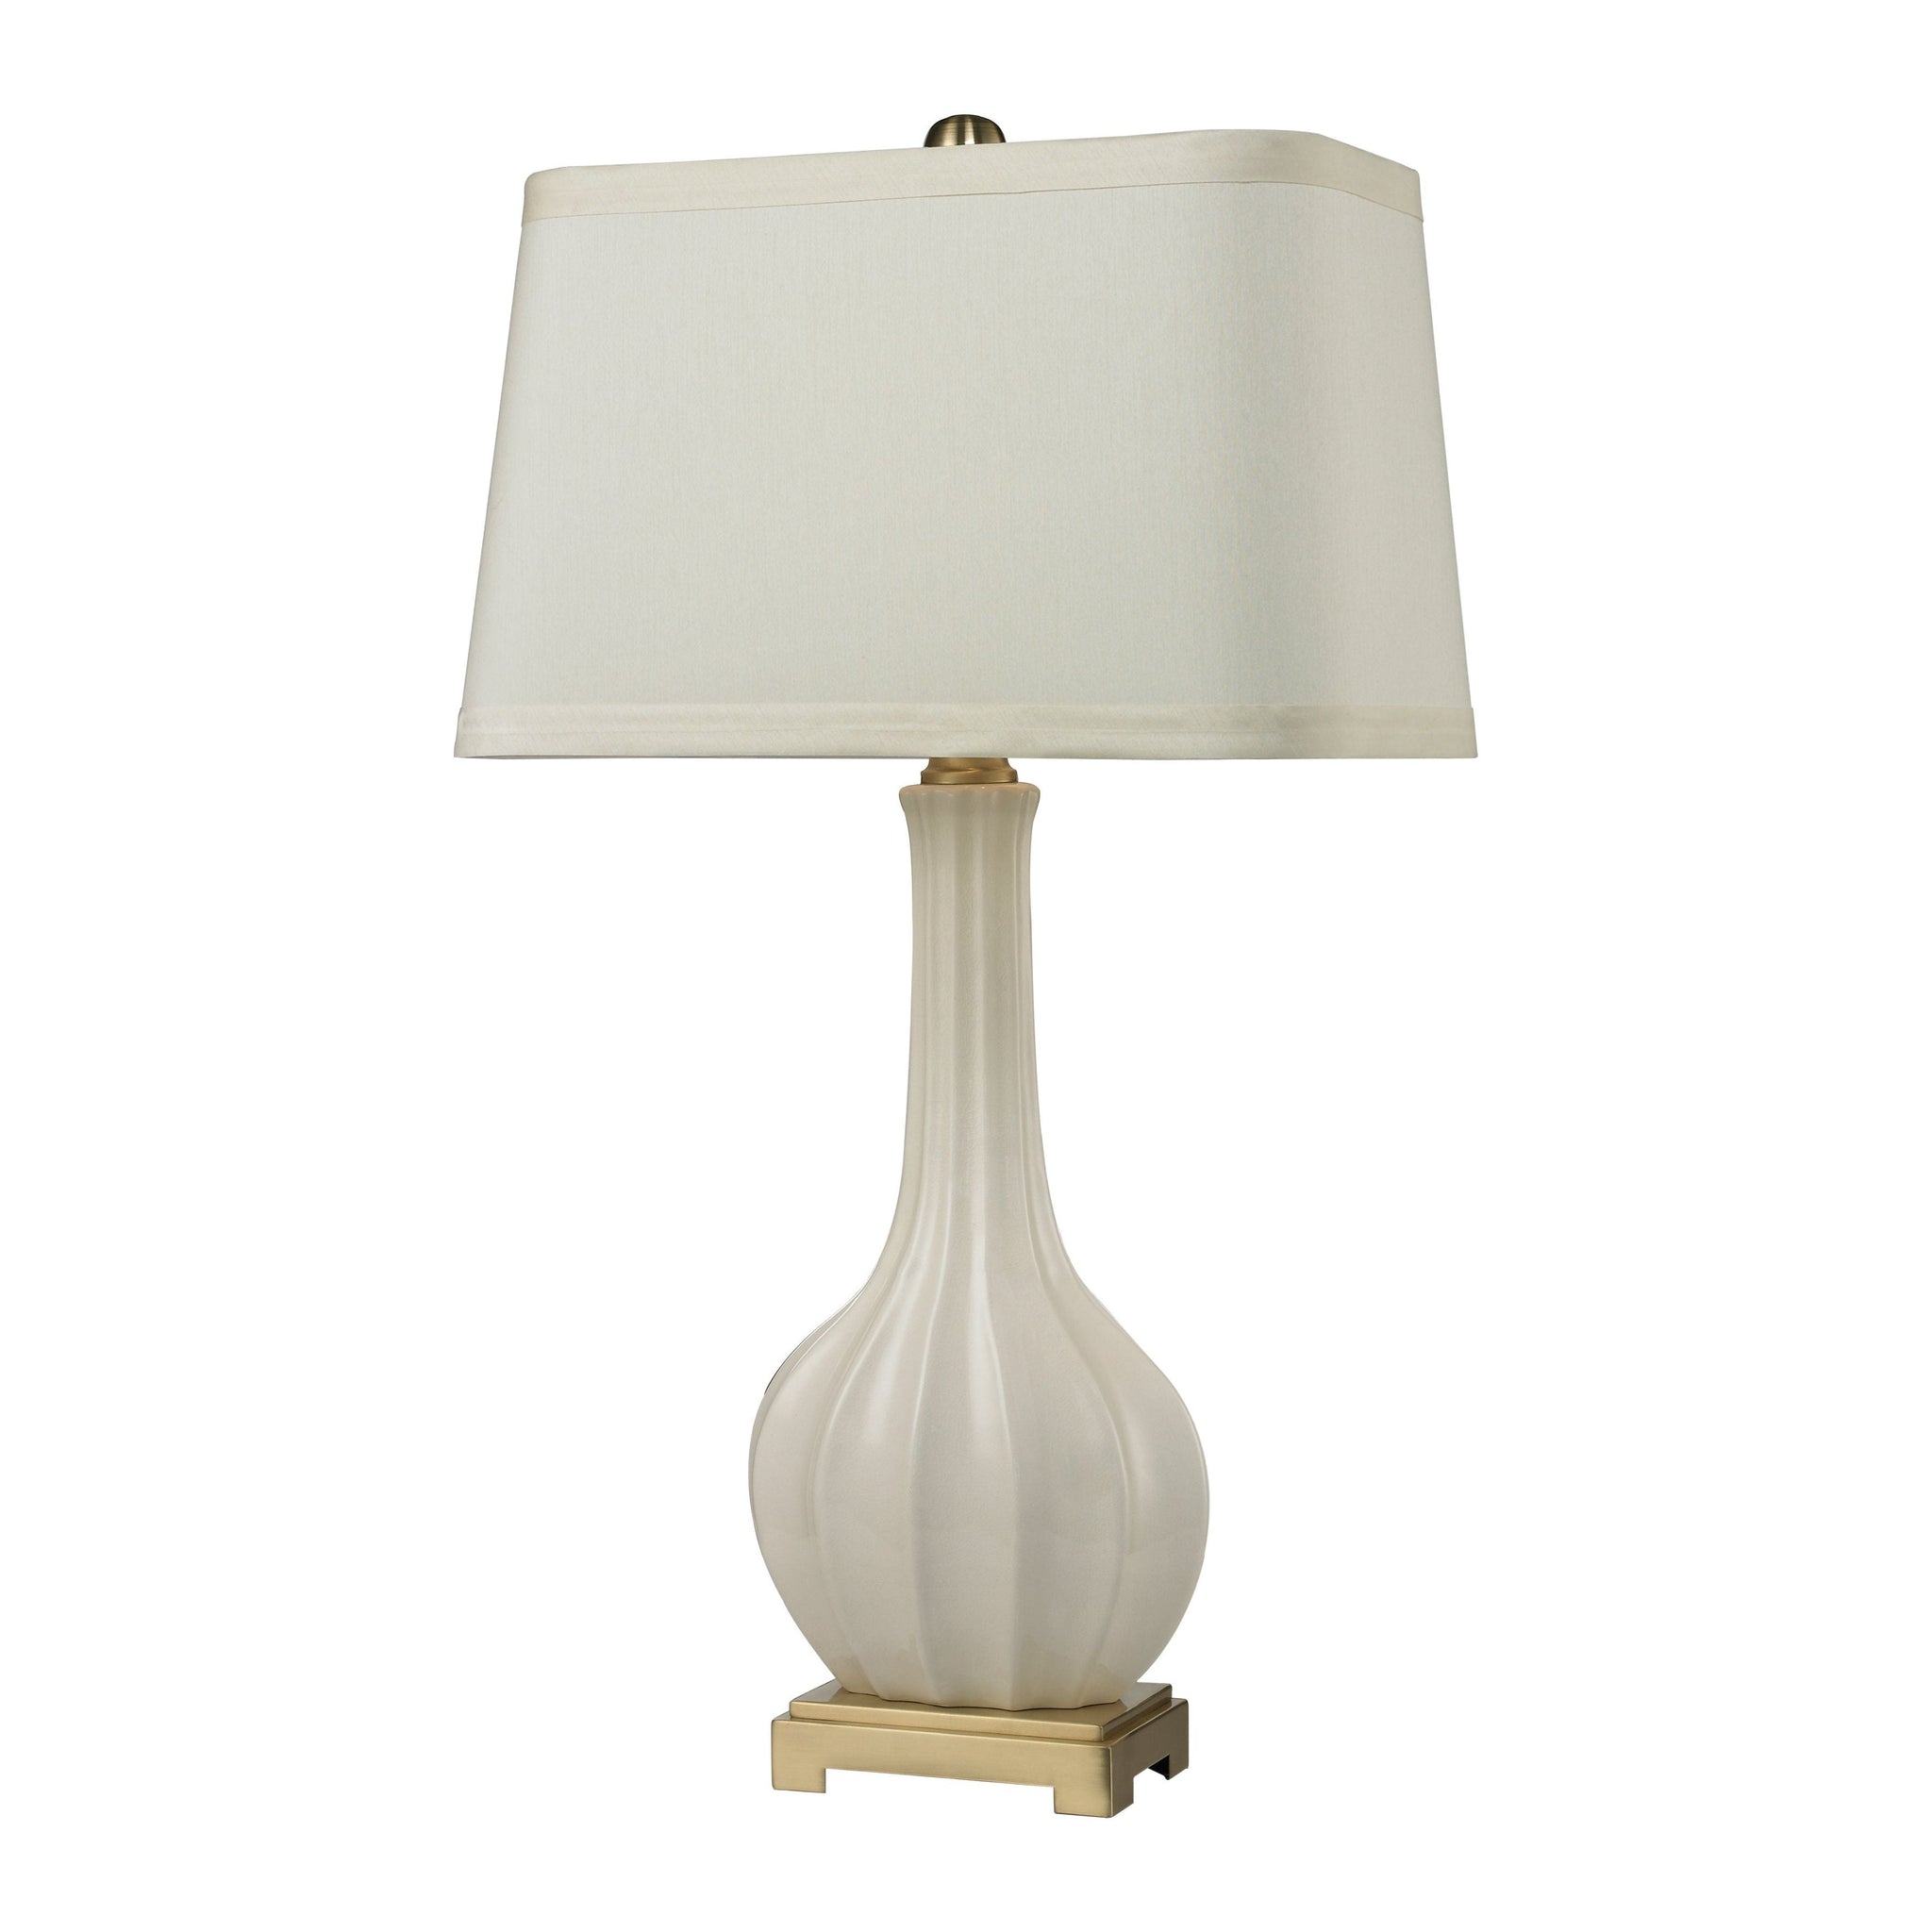 Fluted Ceramic 34" High 1-Light Table Lamp